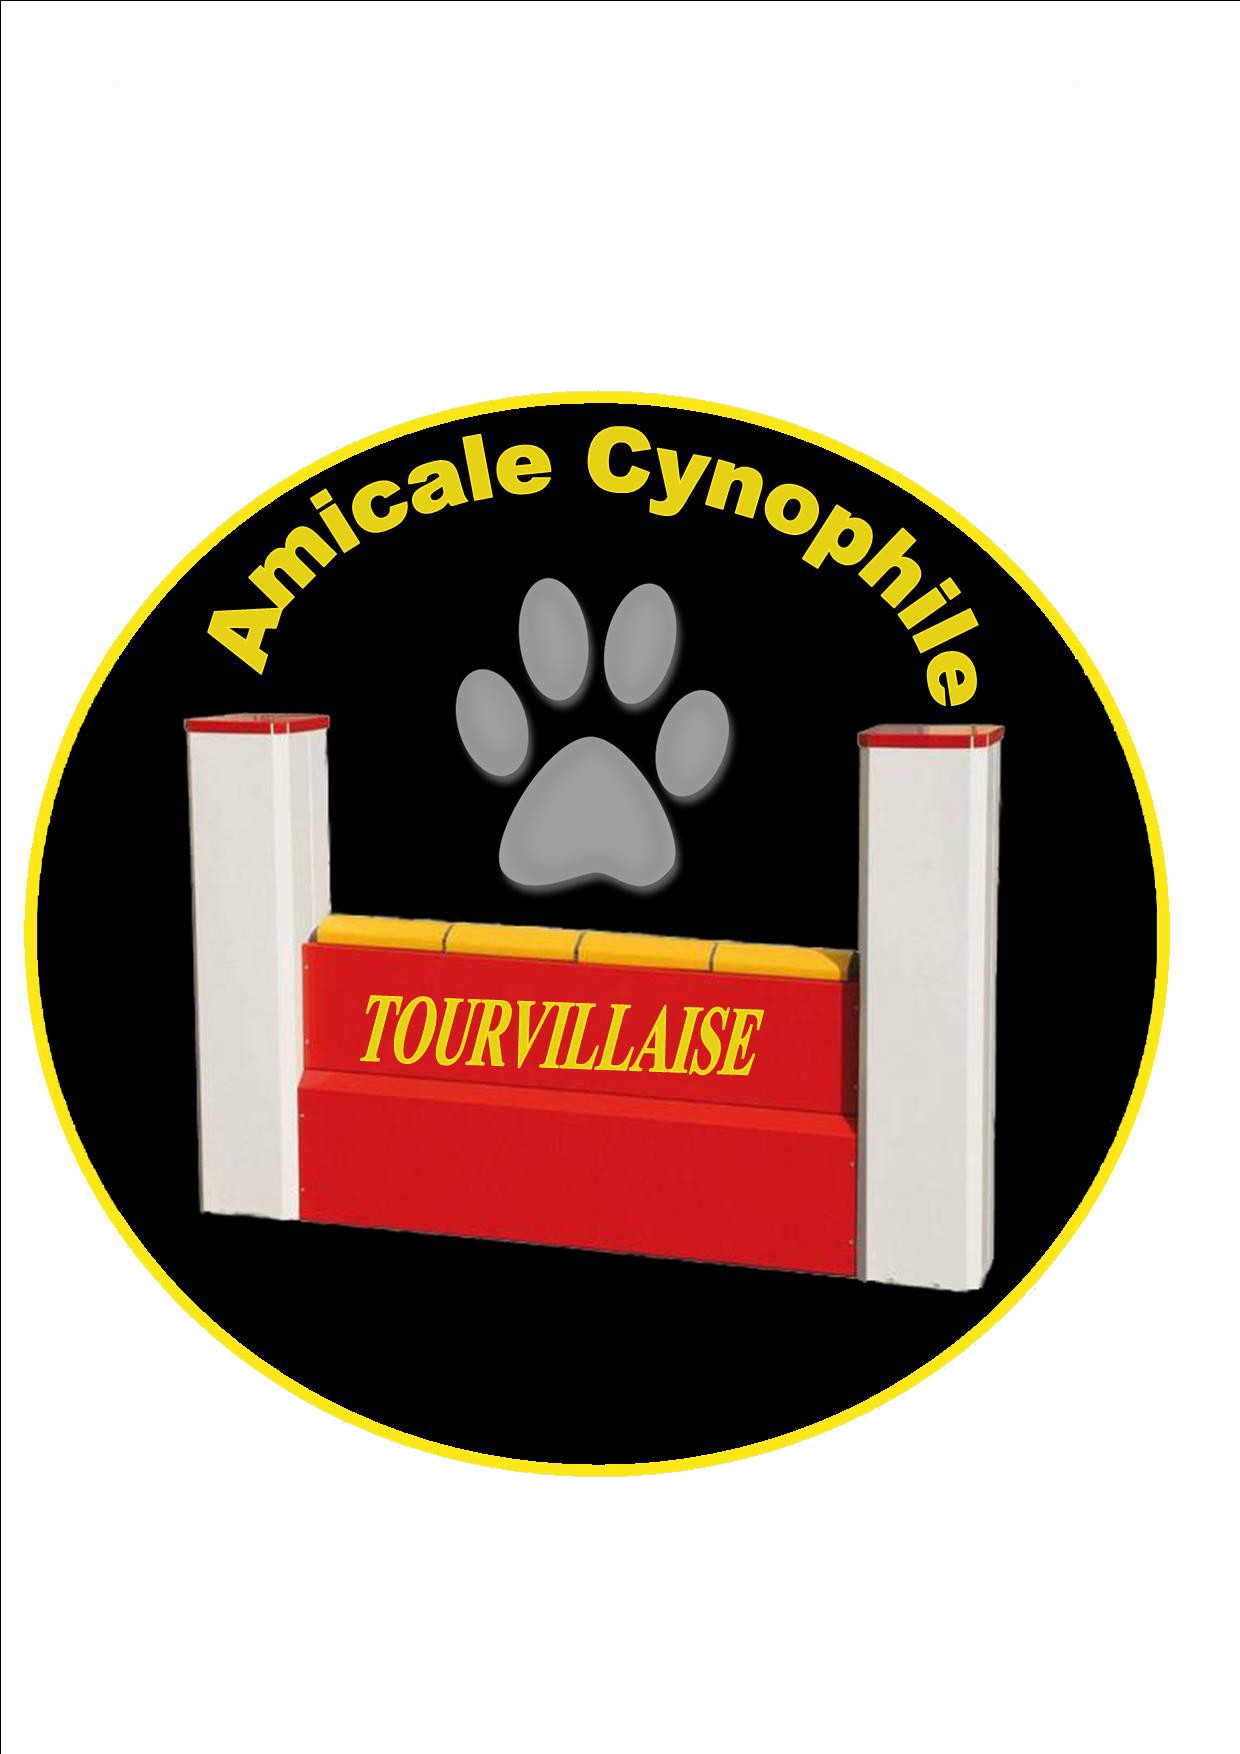 Amicale Cynophile Tourvillaise